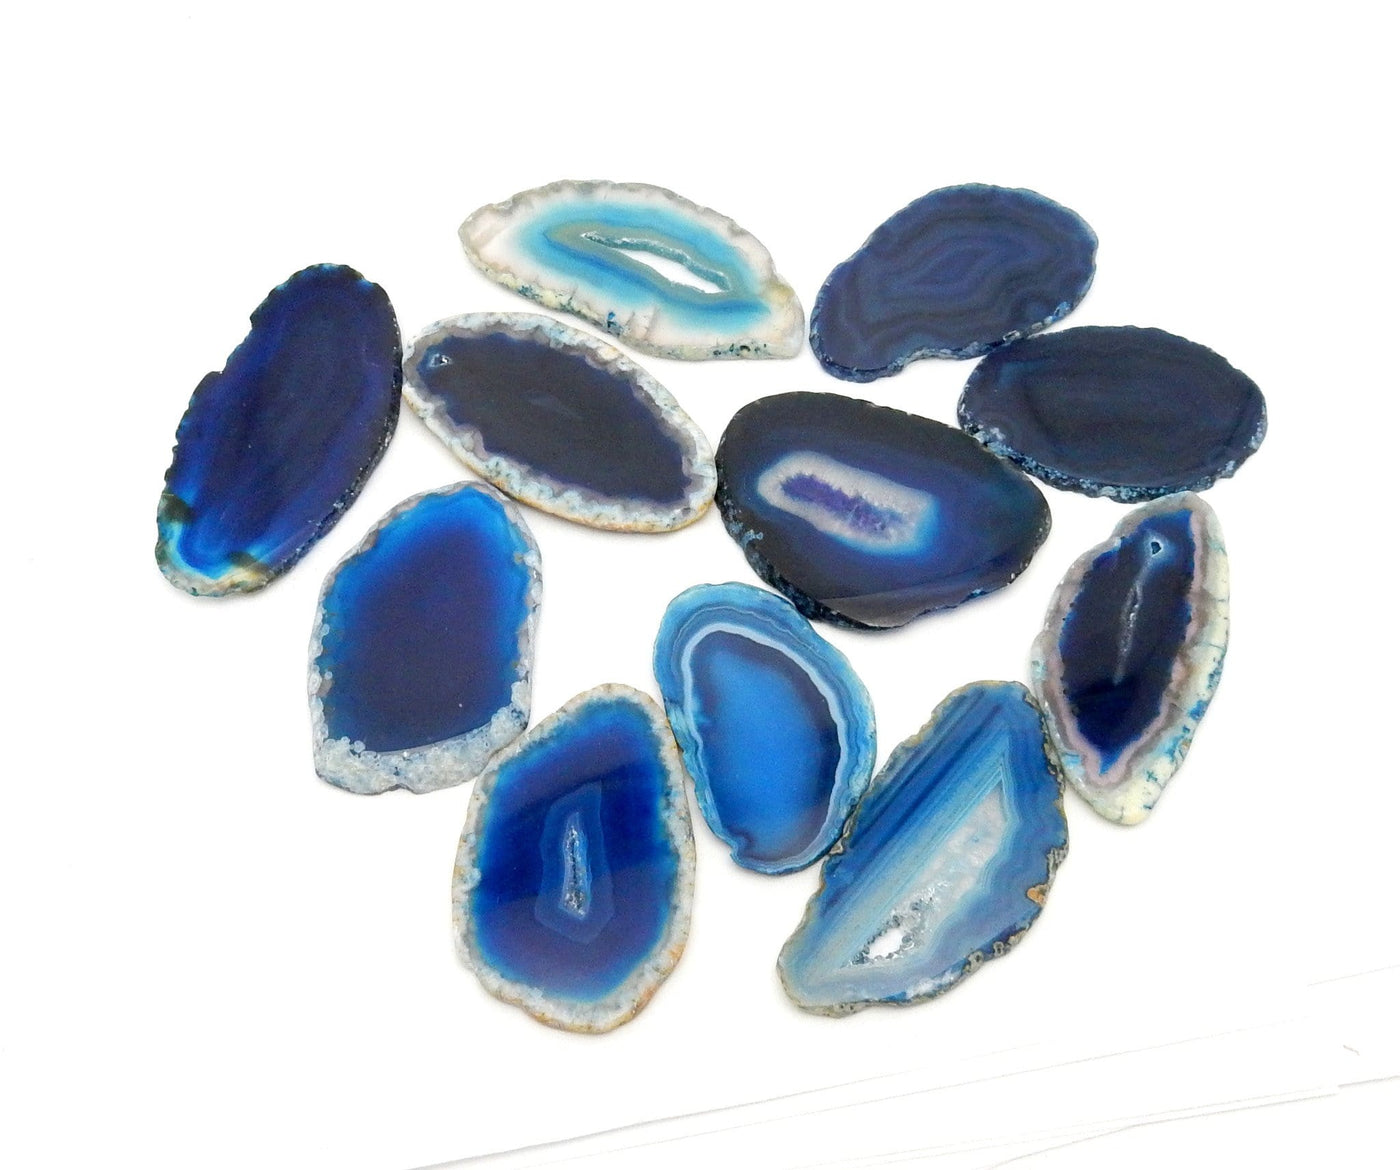 Picture of Blue agate slices on a white back ground.